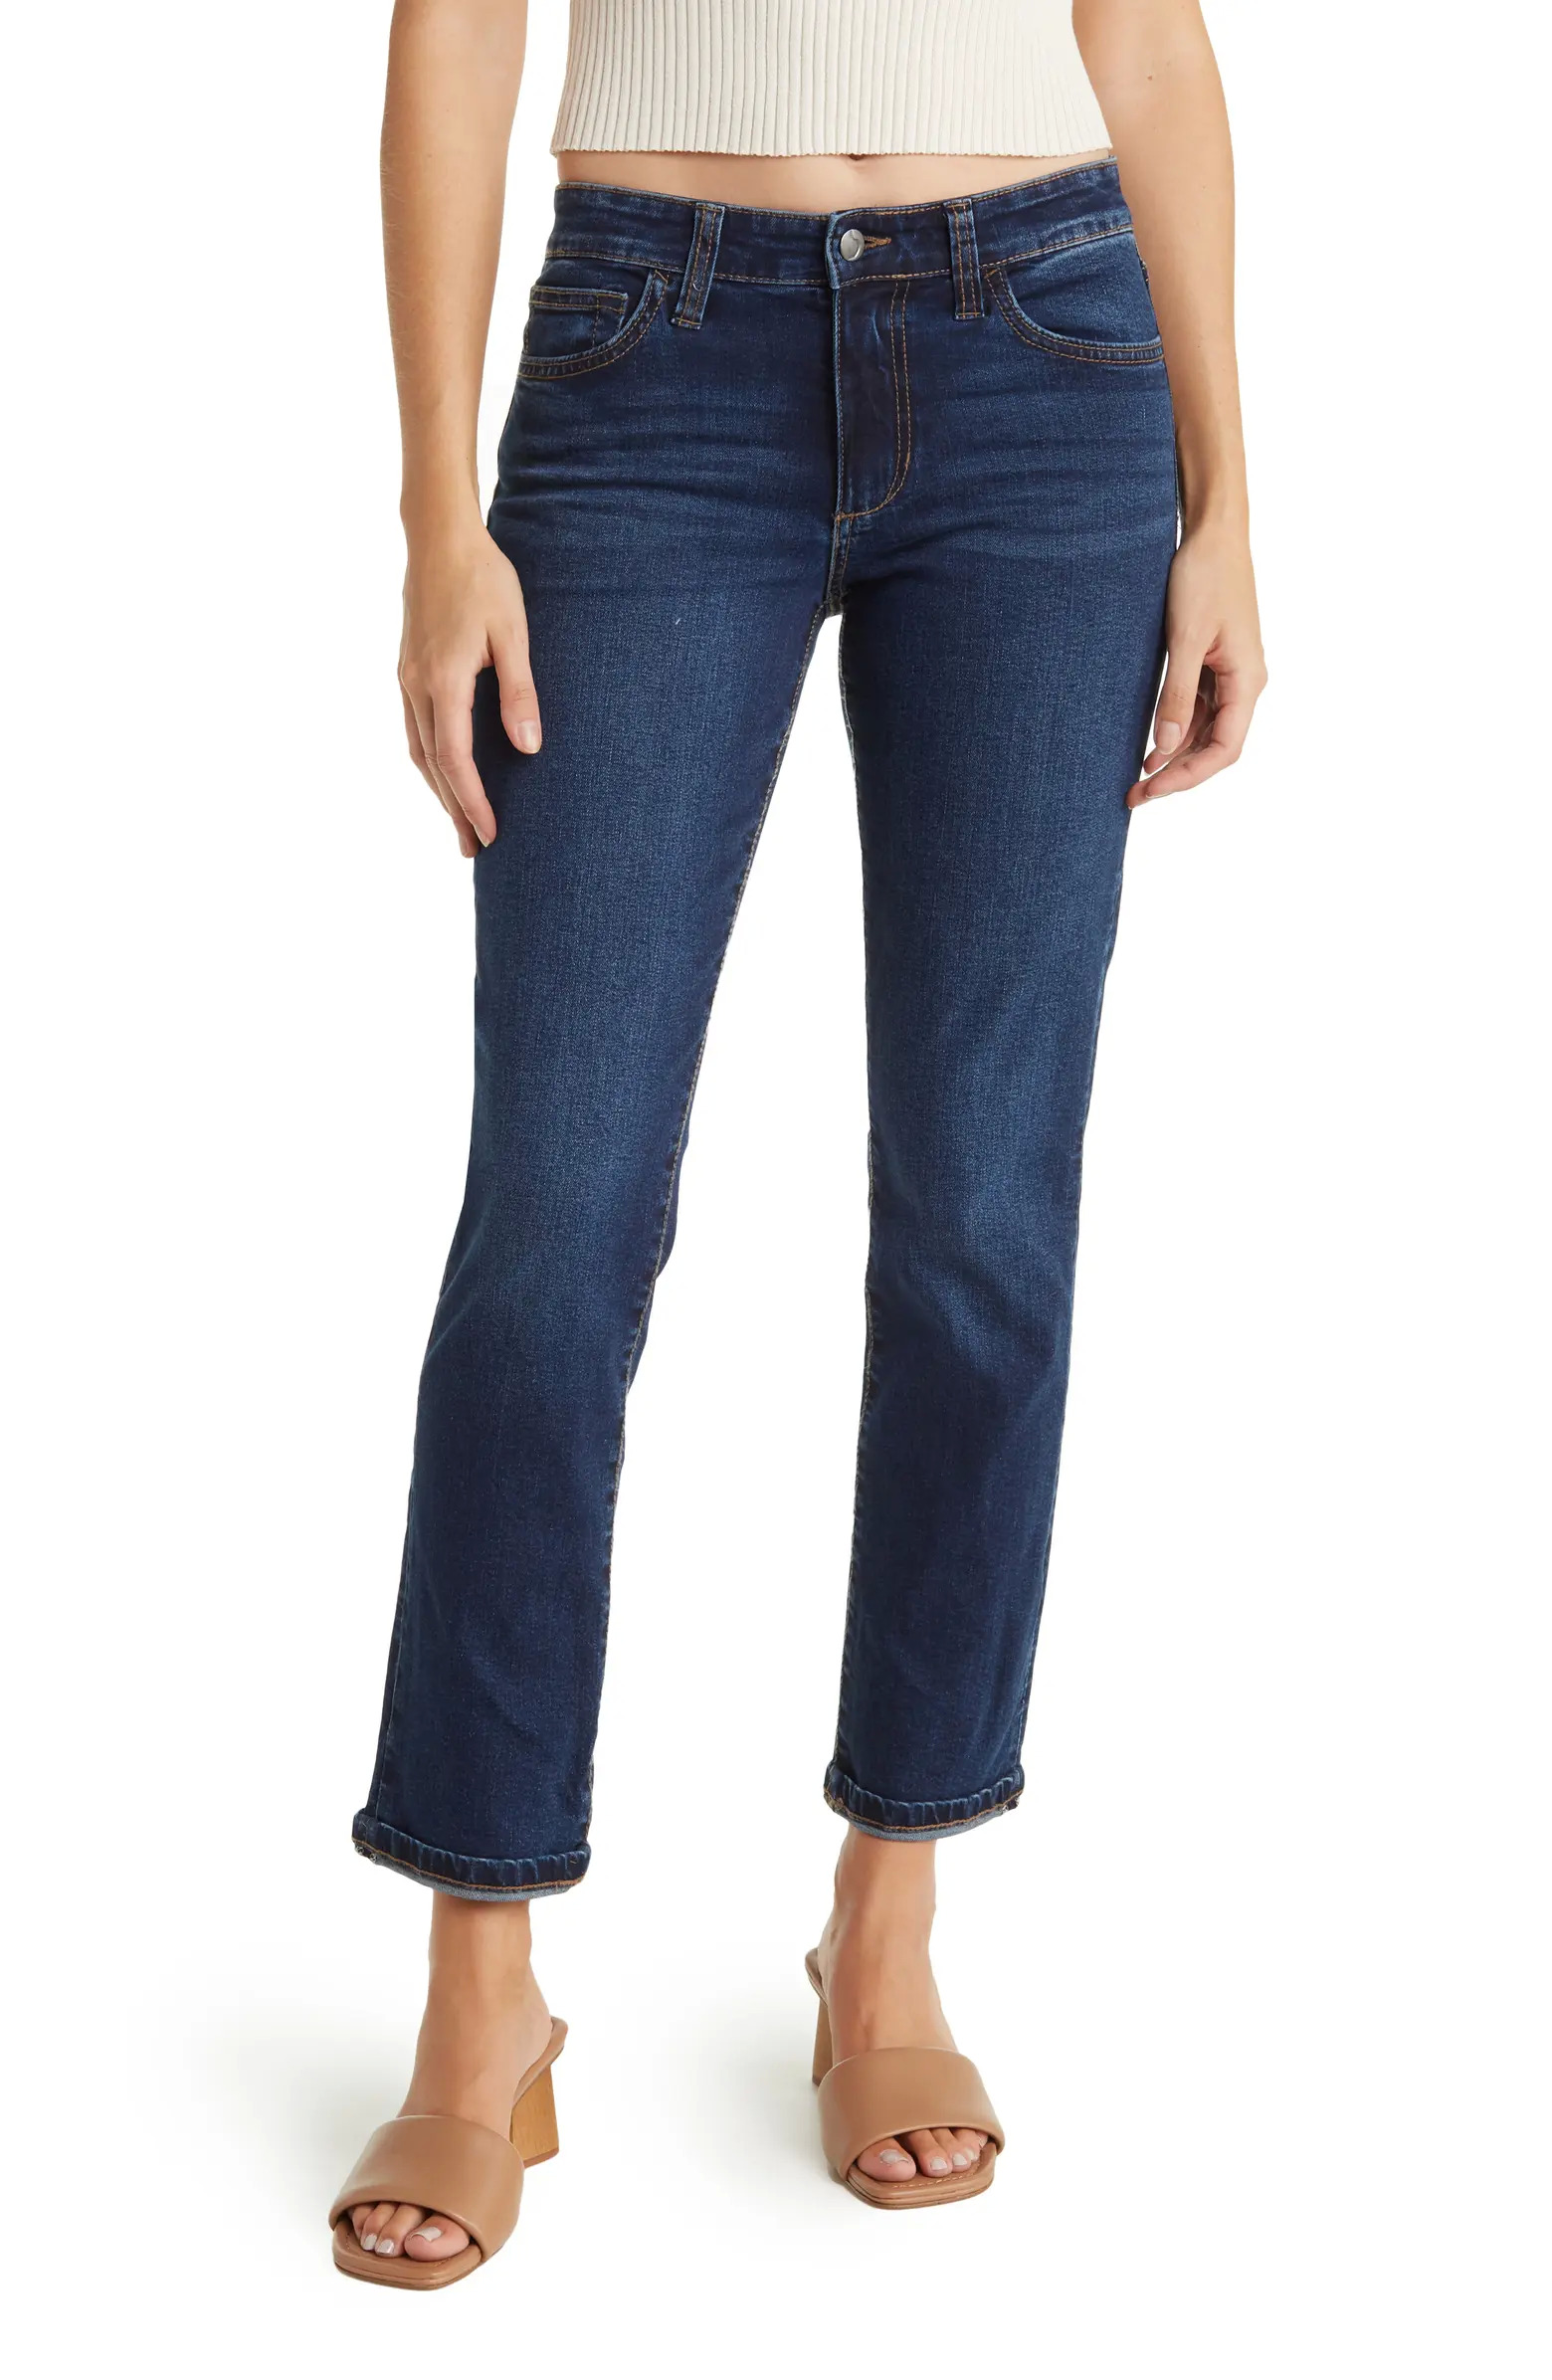 Nordstrom Rack has 25% Off Joe’s & Hudson Jeans for Women, Lara Mid Rise Straight Ankle Jeans $44.97 + Free Shipping on $49+